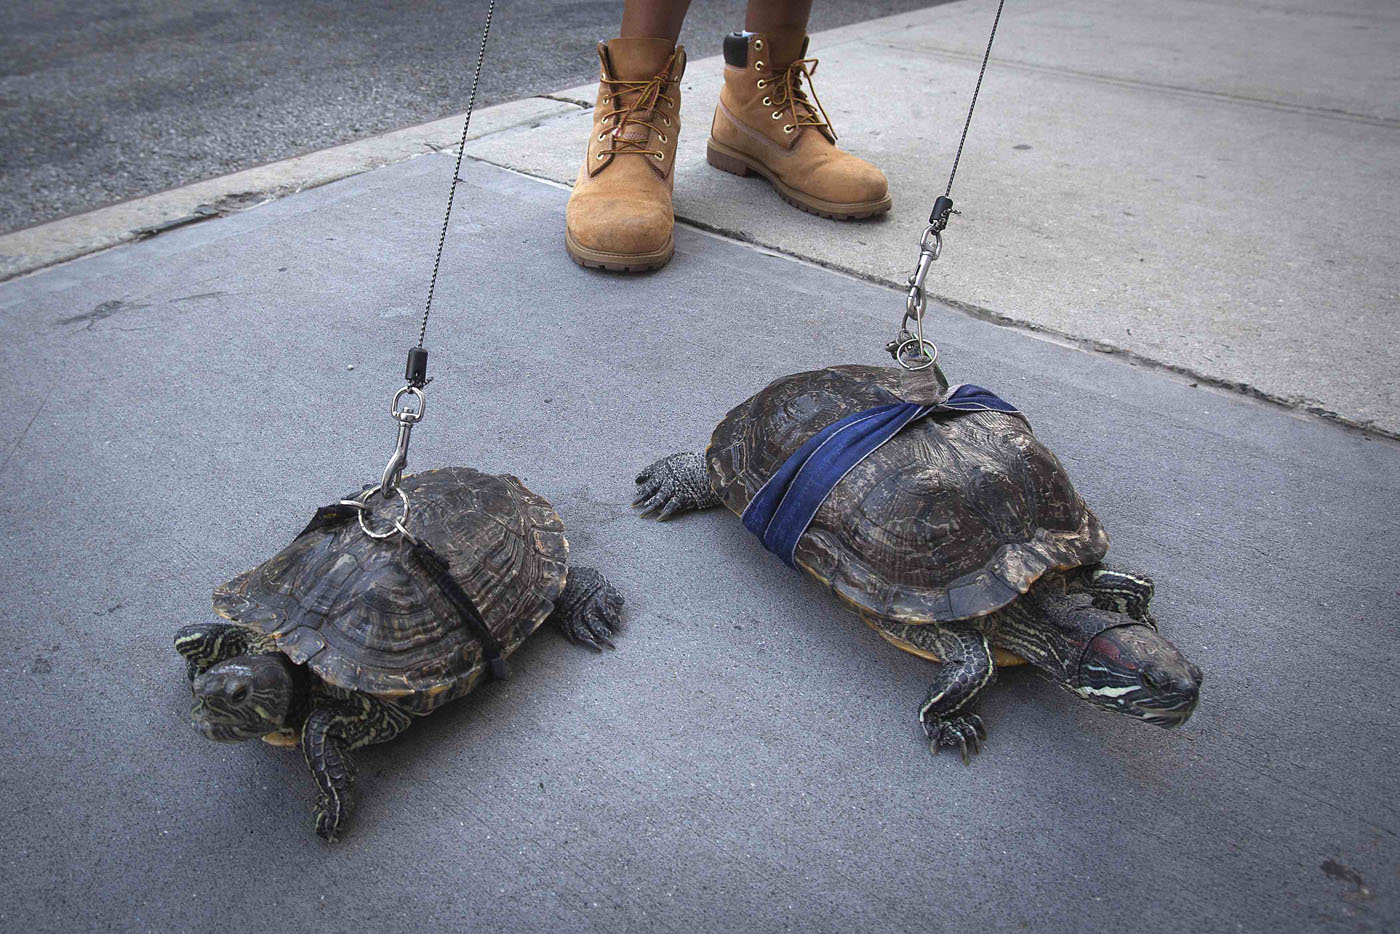 Resident Chris Roland walks his pet turtles Cindy and Kuka in New York City on Aug. 4. Roland has had the turtles for years and says he walks them daily.